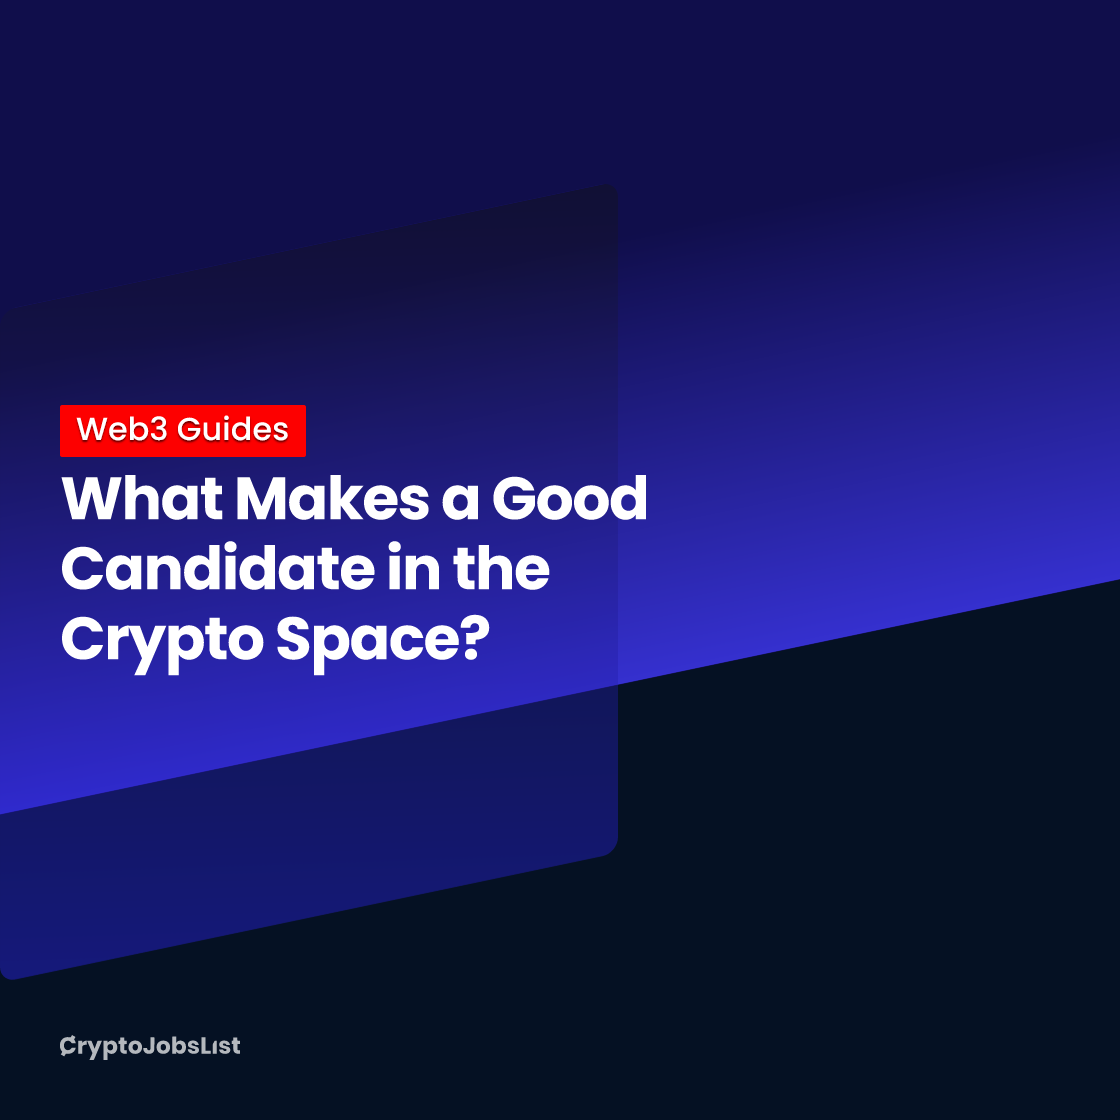 What Makes a Good Candidate in the Crypto Space?